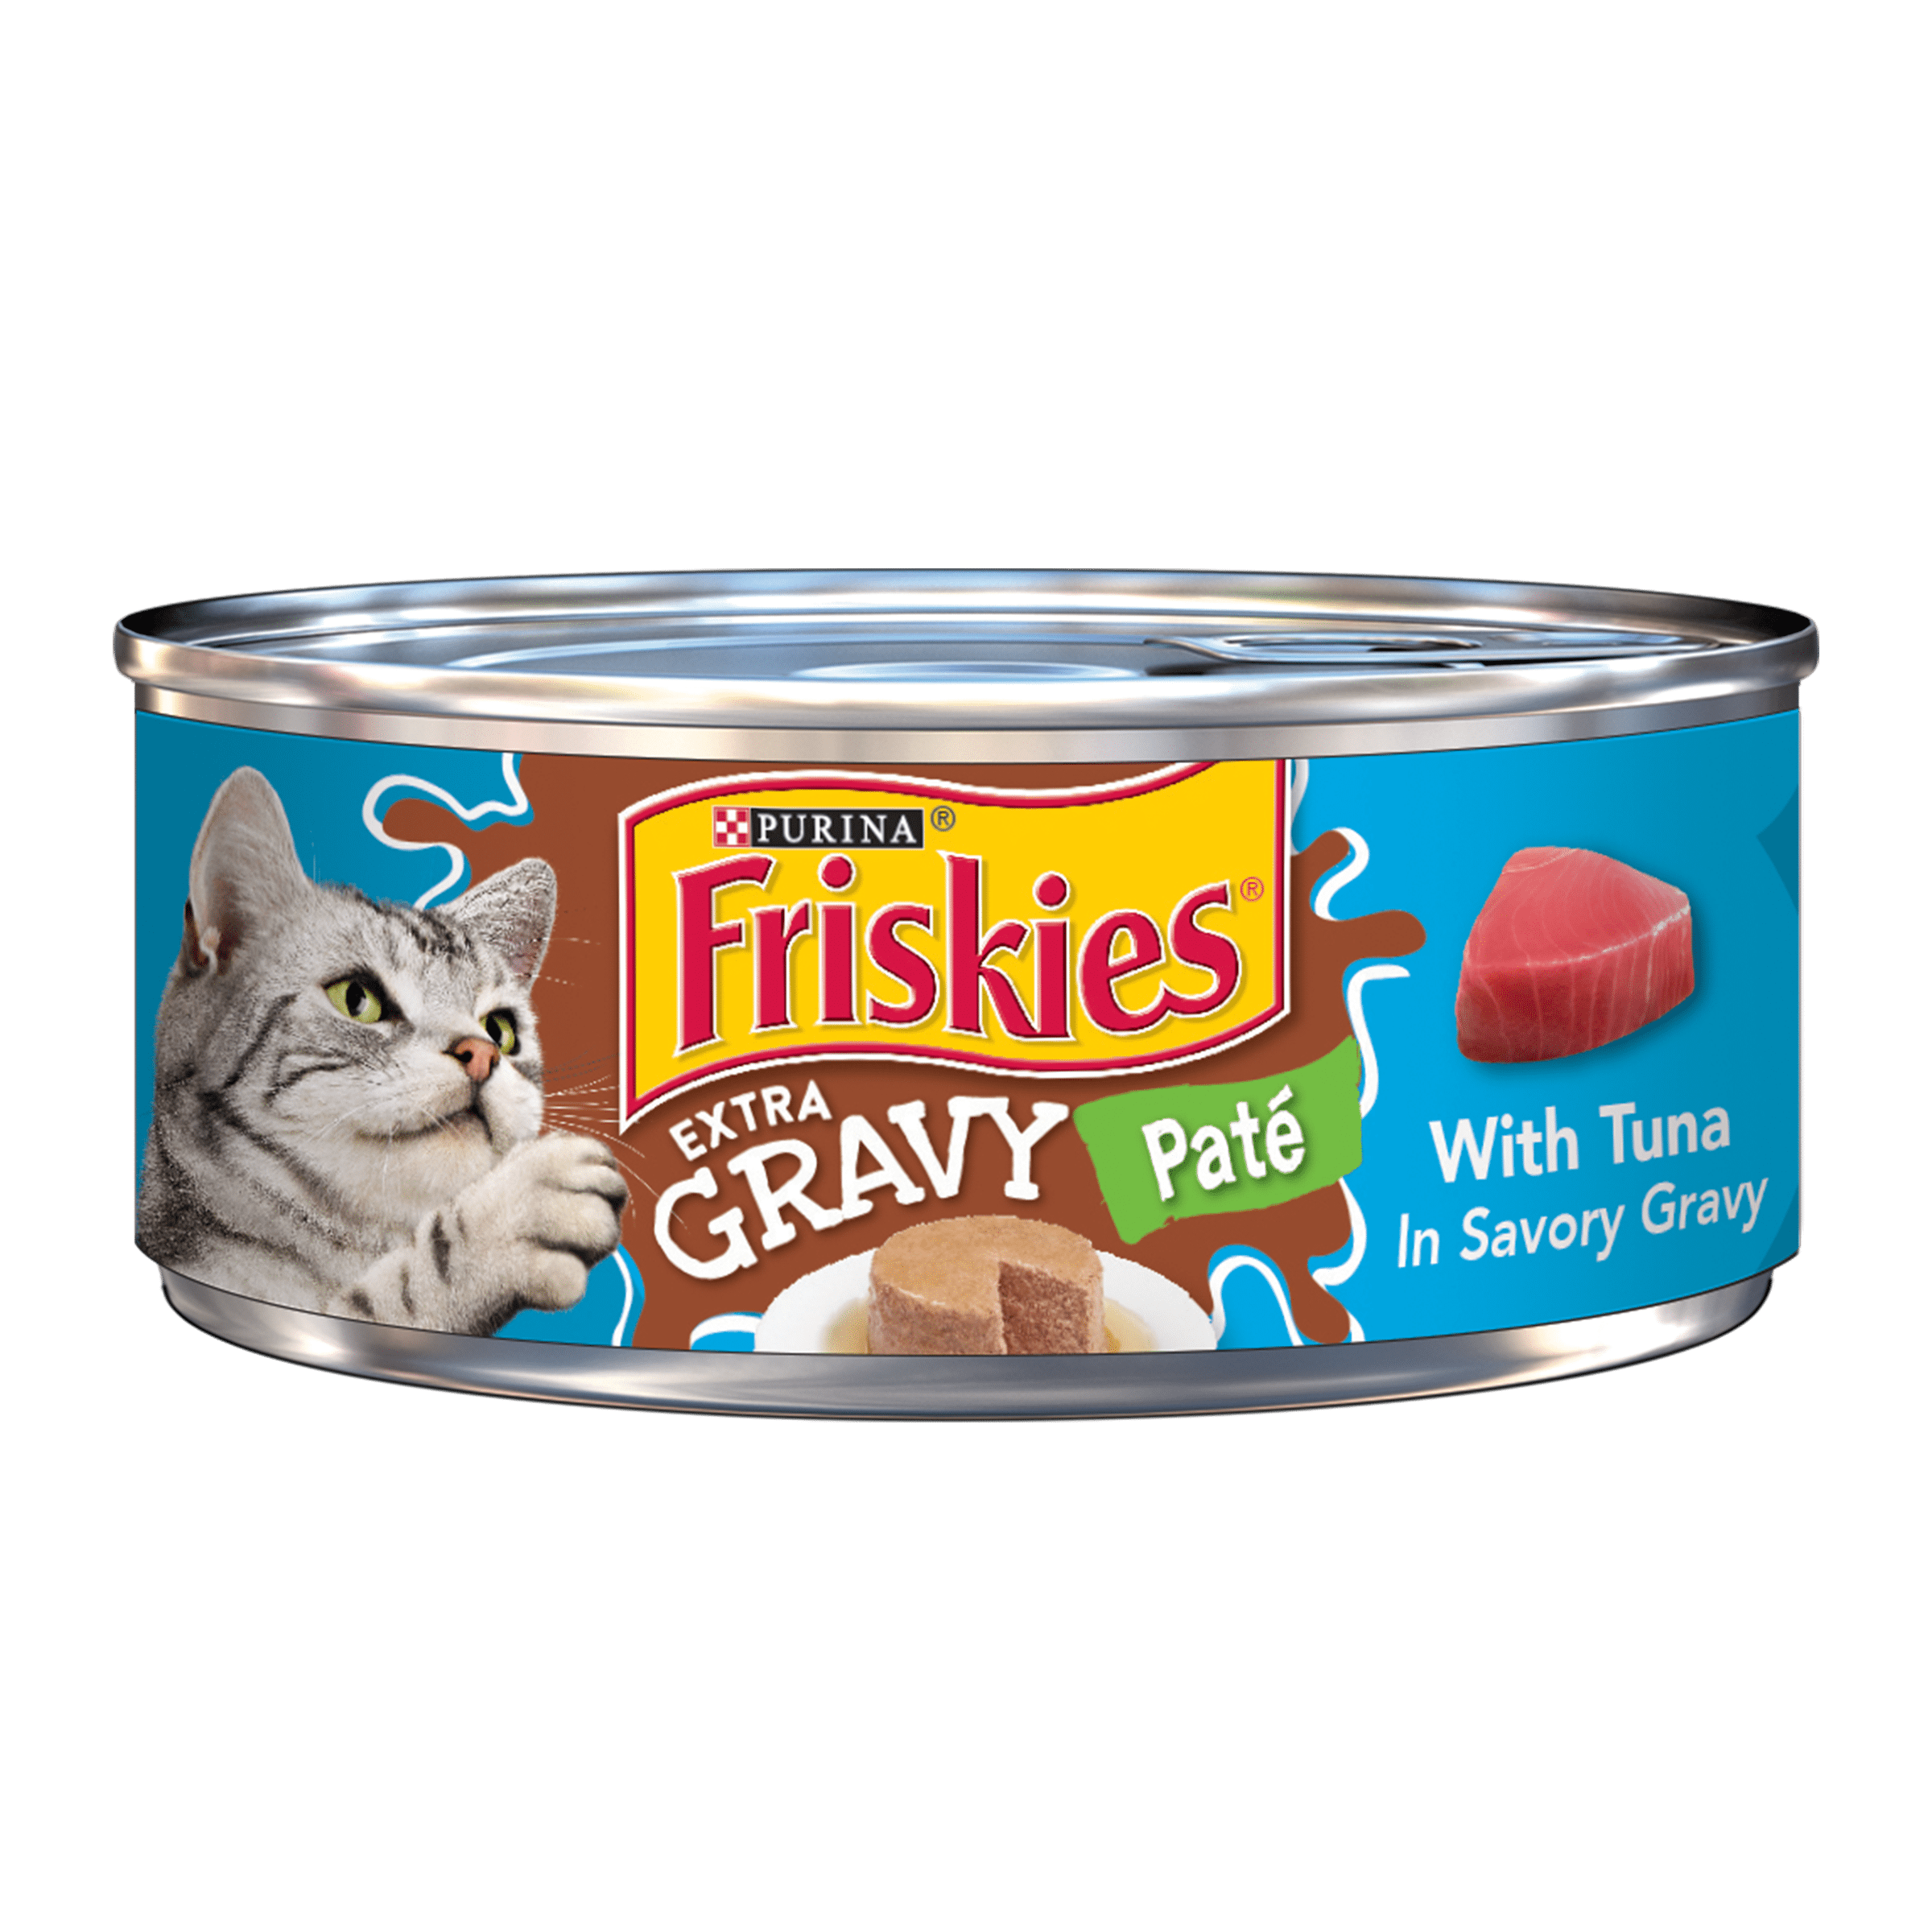 Friskies Extra Gravy Pate With Tuna in Savory Gravy Canned Cat Food, 5